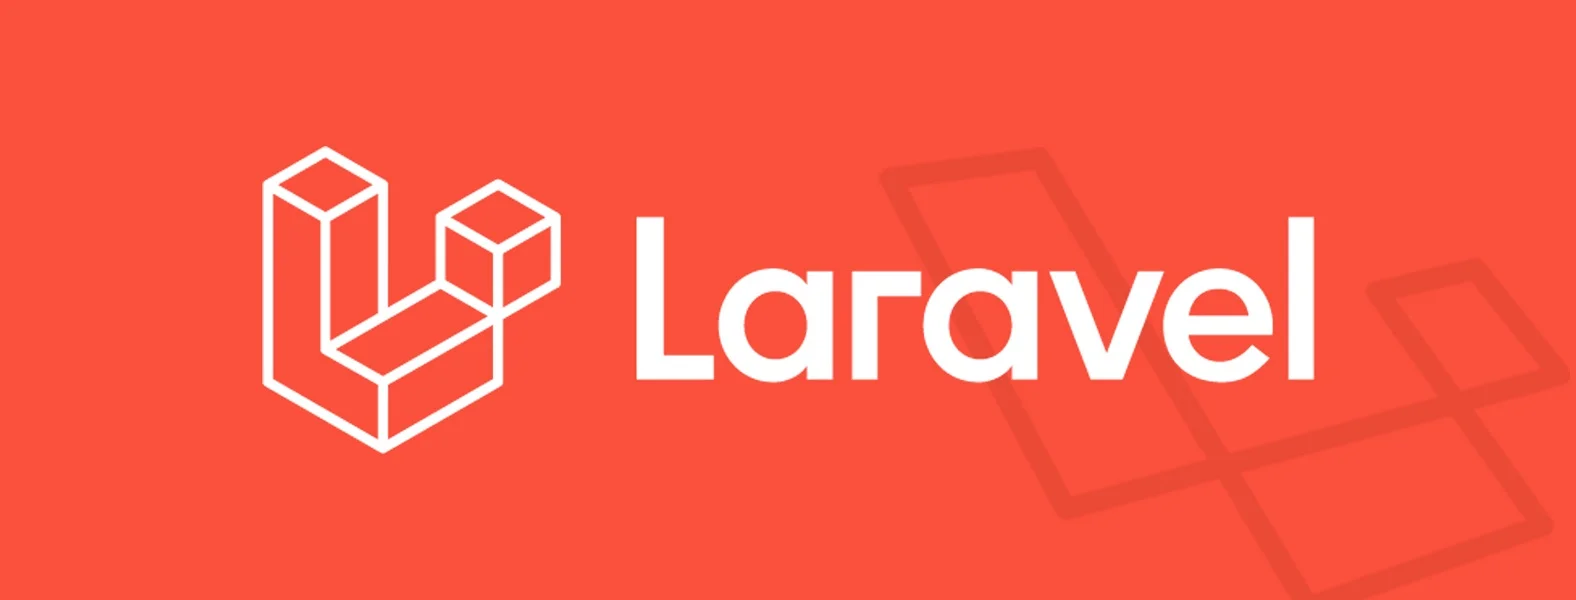 Laravel Redesign - A New and  beautiful Design of Laravel cover image